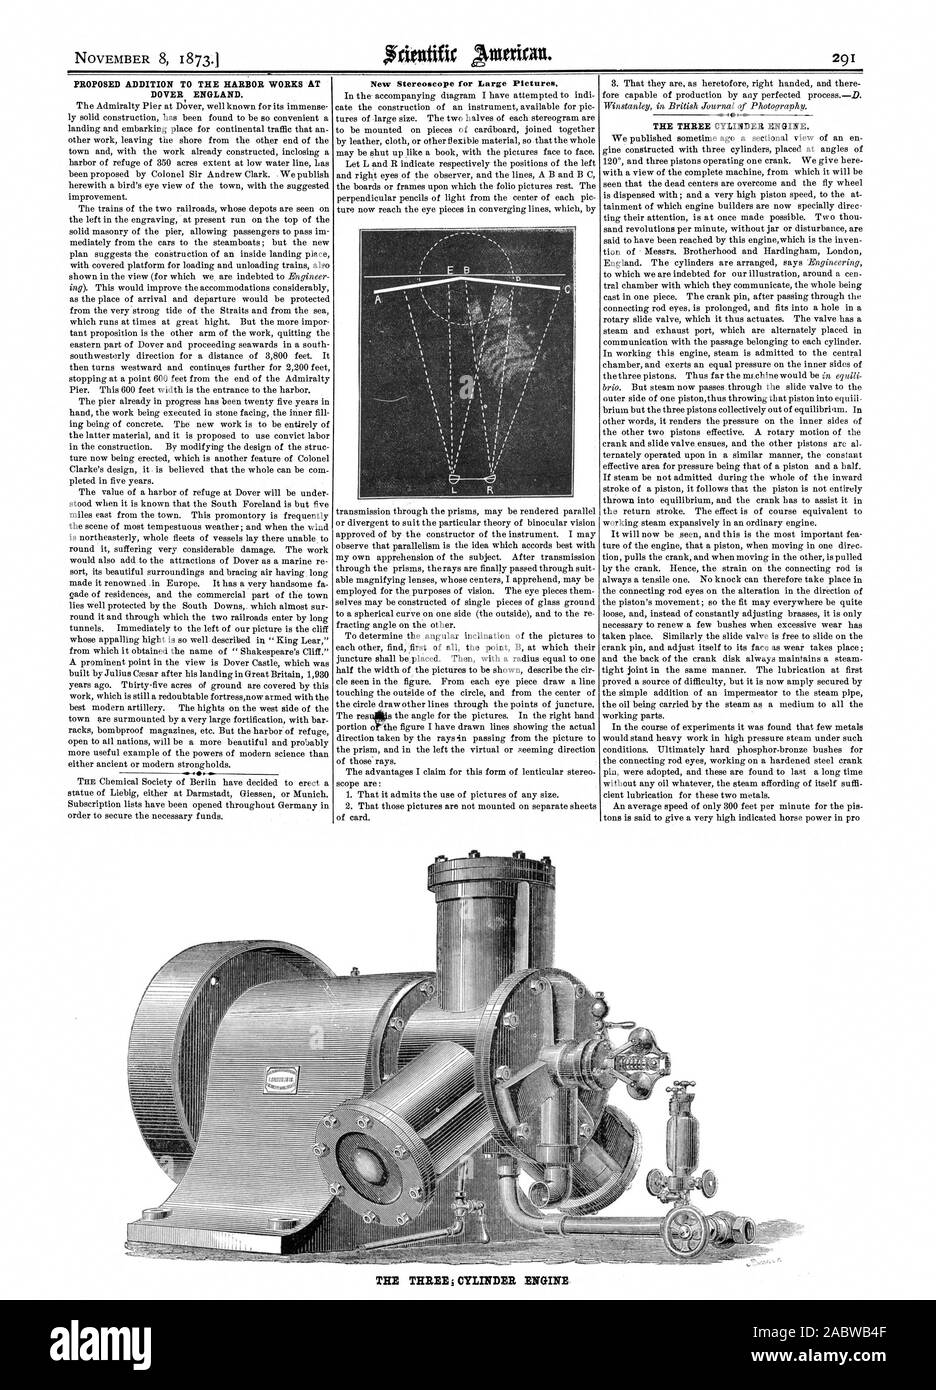 291 PROPOSED ADDITION TO THE HARBOR WORKS AT DOVER ENGLAND. 41 0. New Stereoscope for Large Pictures. THE THREE CYLINDER ENGINE. THE THREE j CYLINDER ENGINE, scientific american, 1873-11-08 Stock Photo